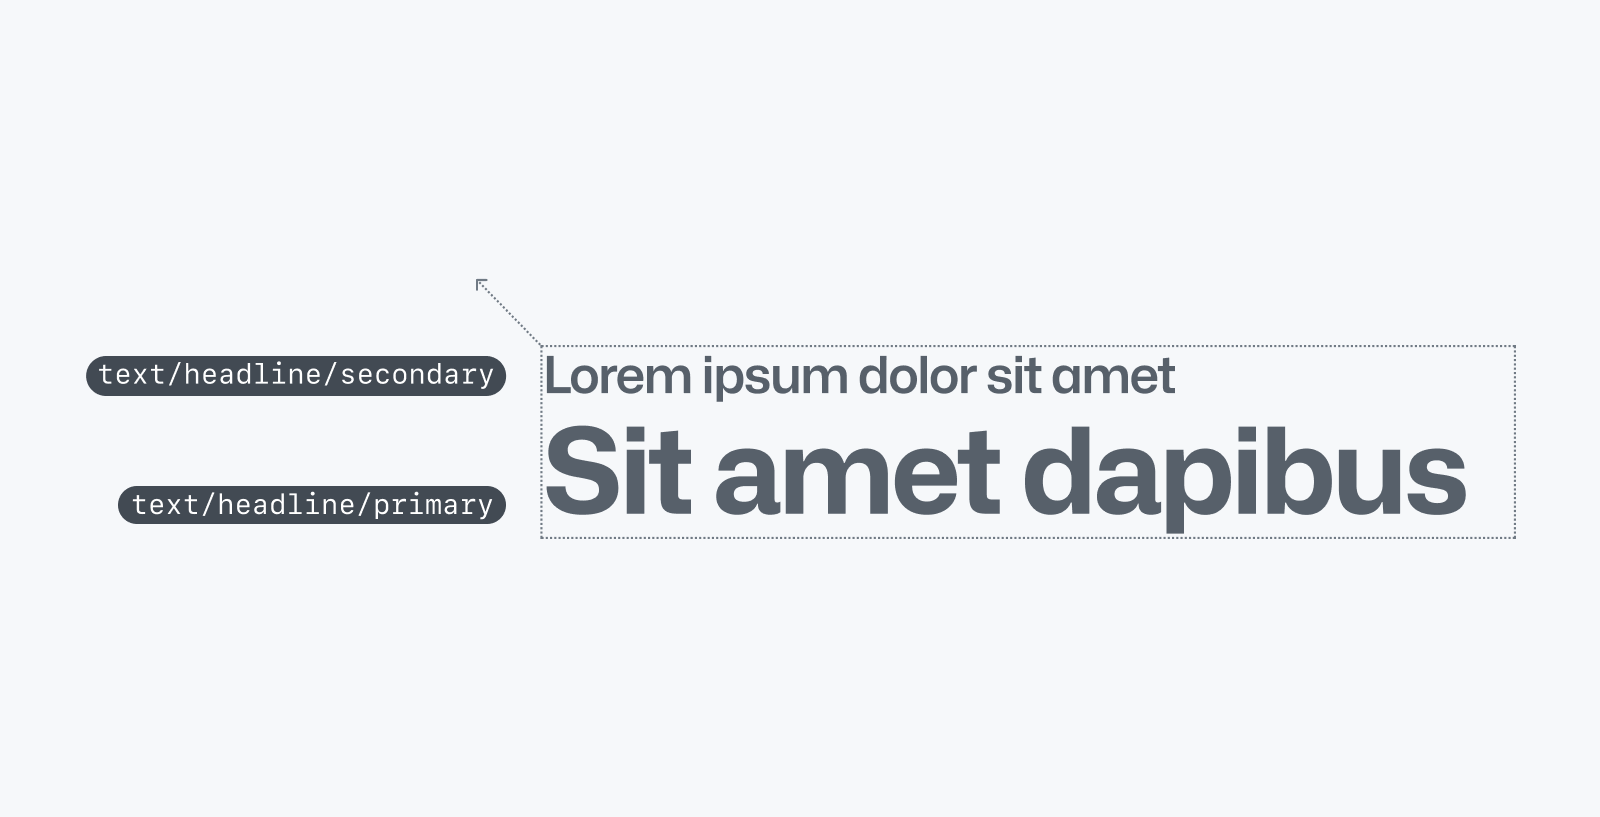 Examples of text/headline/secondary and text/headline/primary using placeholder lorem ipsum copy in dark gray on a light gray background